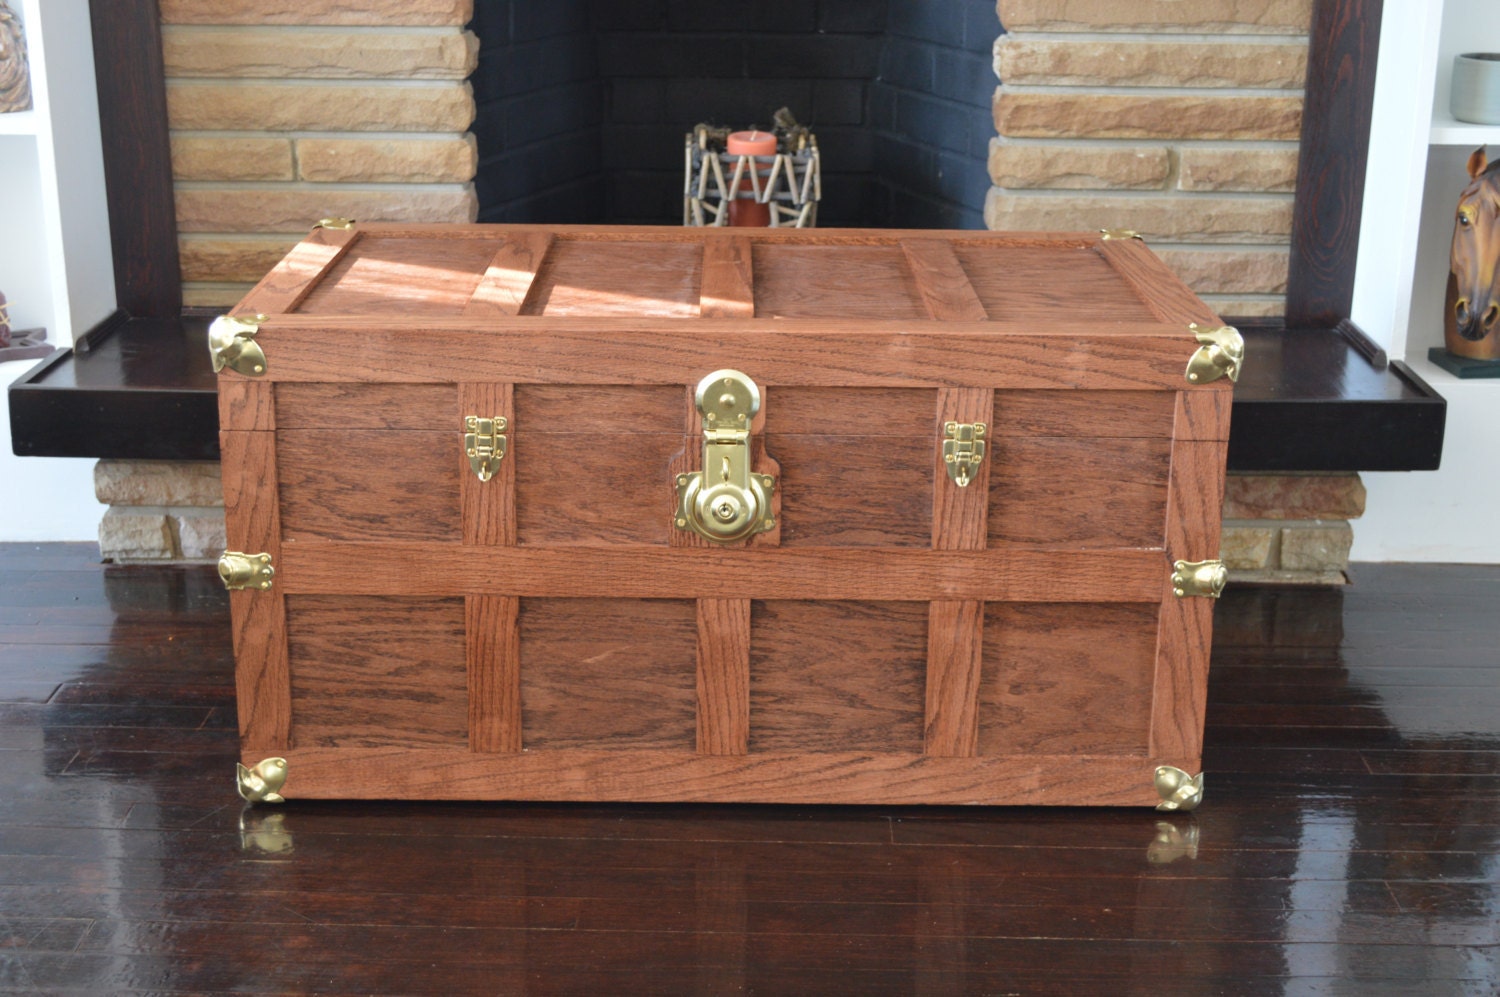 19th C. Wood Steamer Trunk With Brass and Iron Hardware, Signed